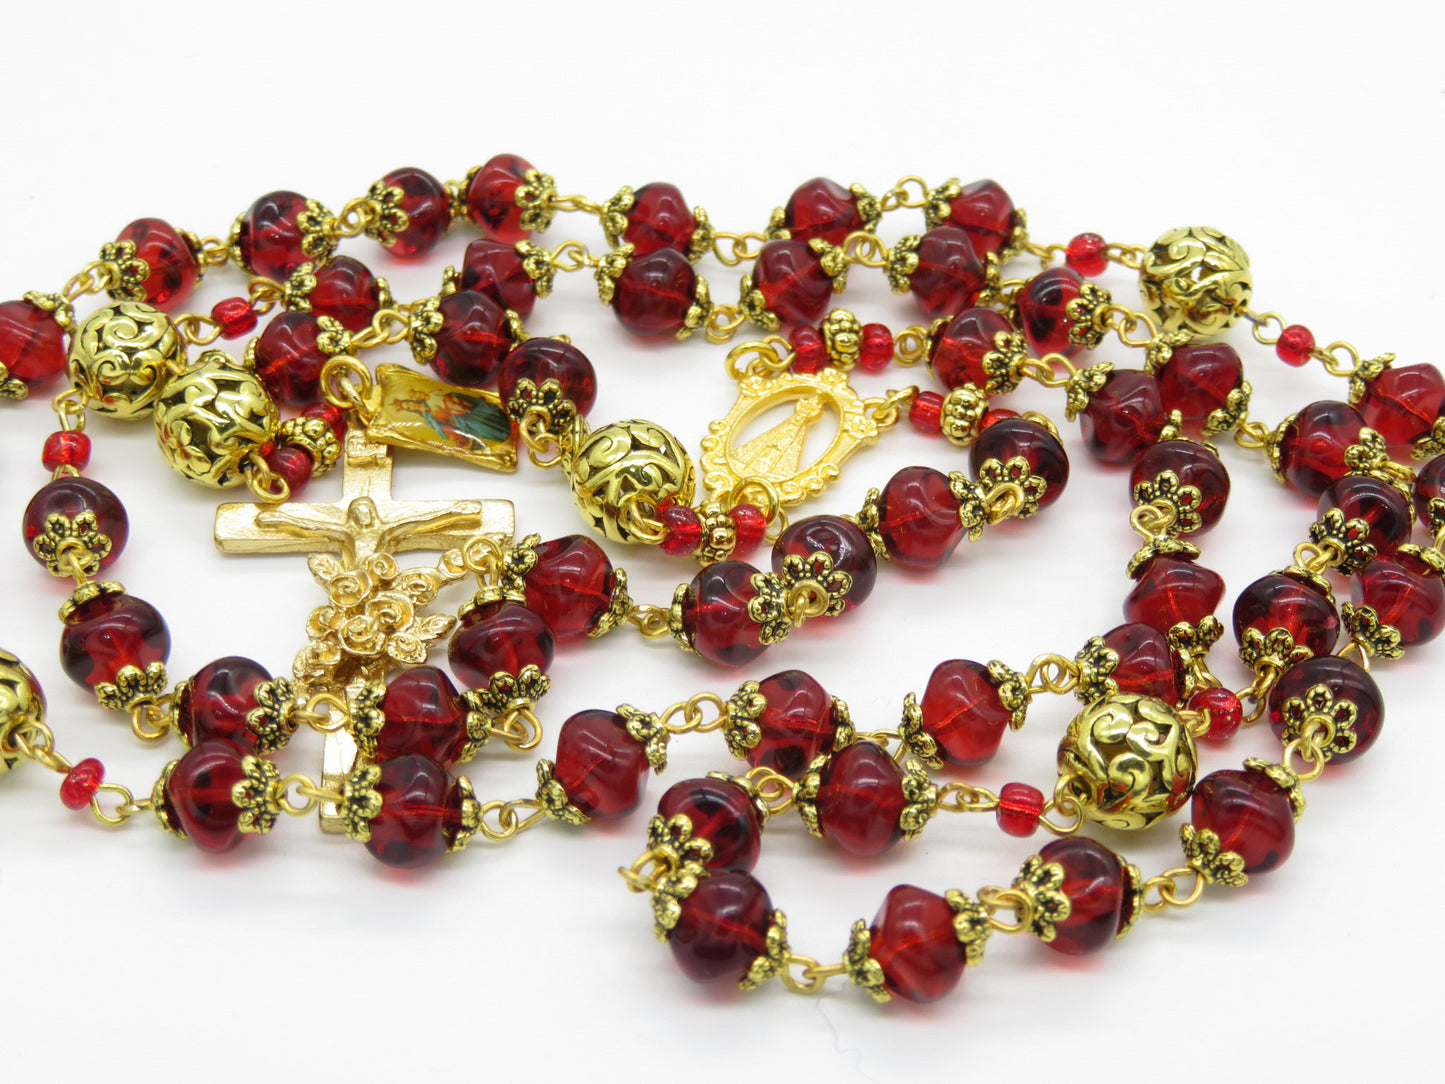 Our Lady of Loretto Rosary prayer beads, Red Glass and gold Rosaries, Saint Therese Crucifix, Sacramental Rosaries, religious gift.